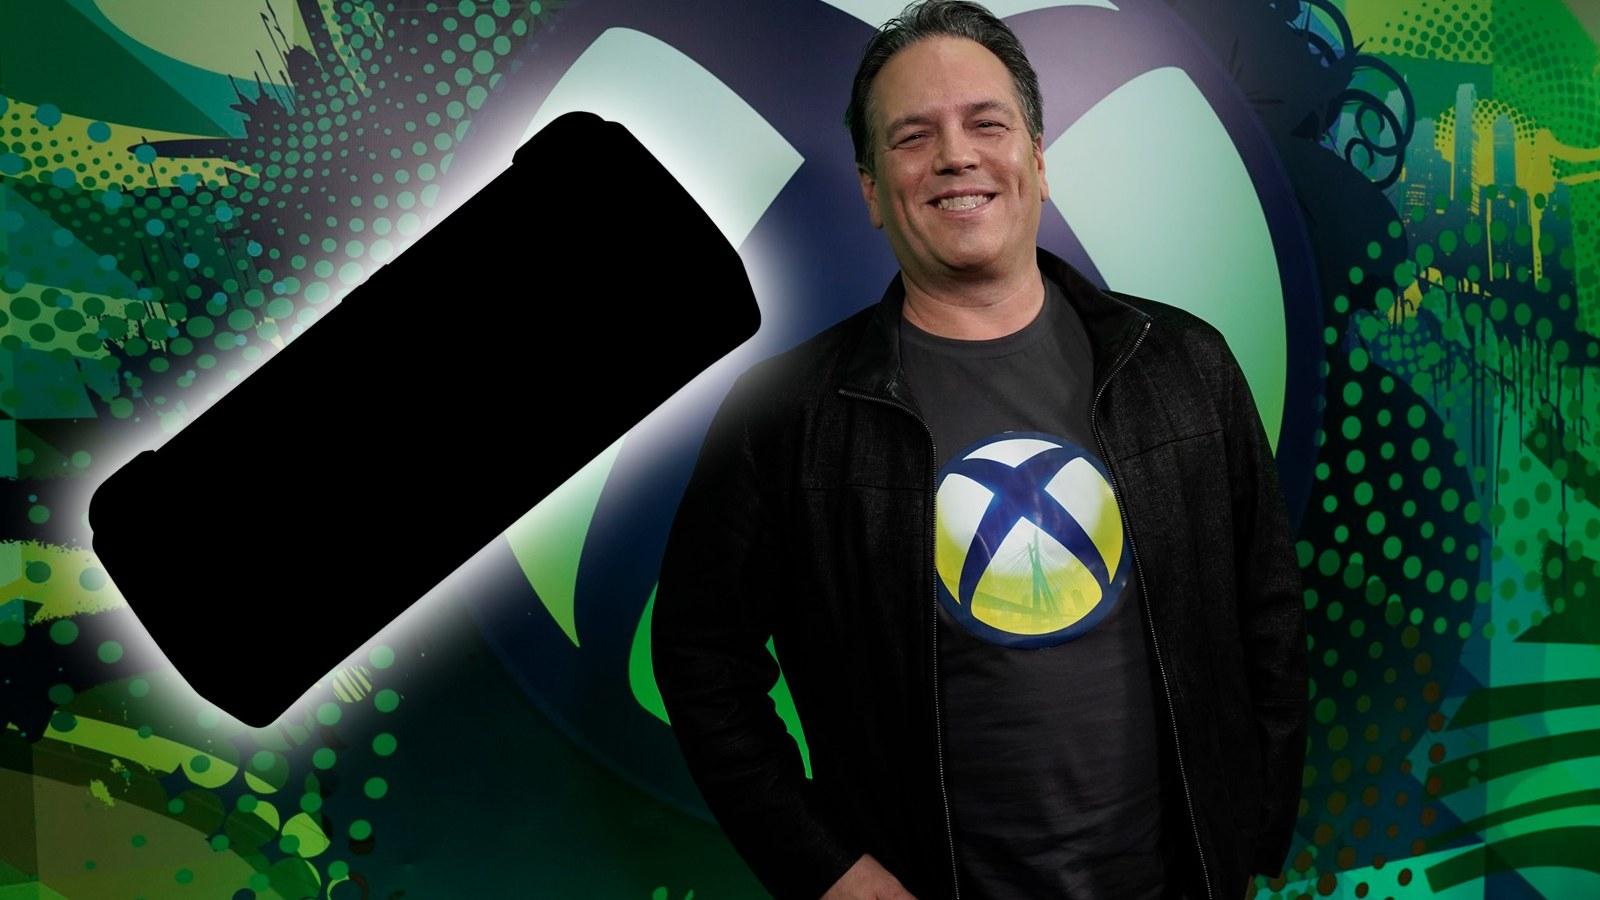 Phil Spencer next to a silhouette of a handheld console